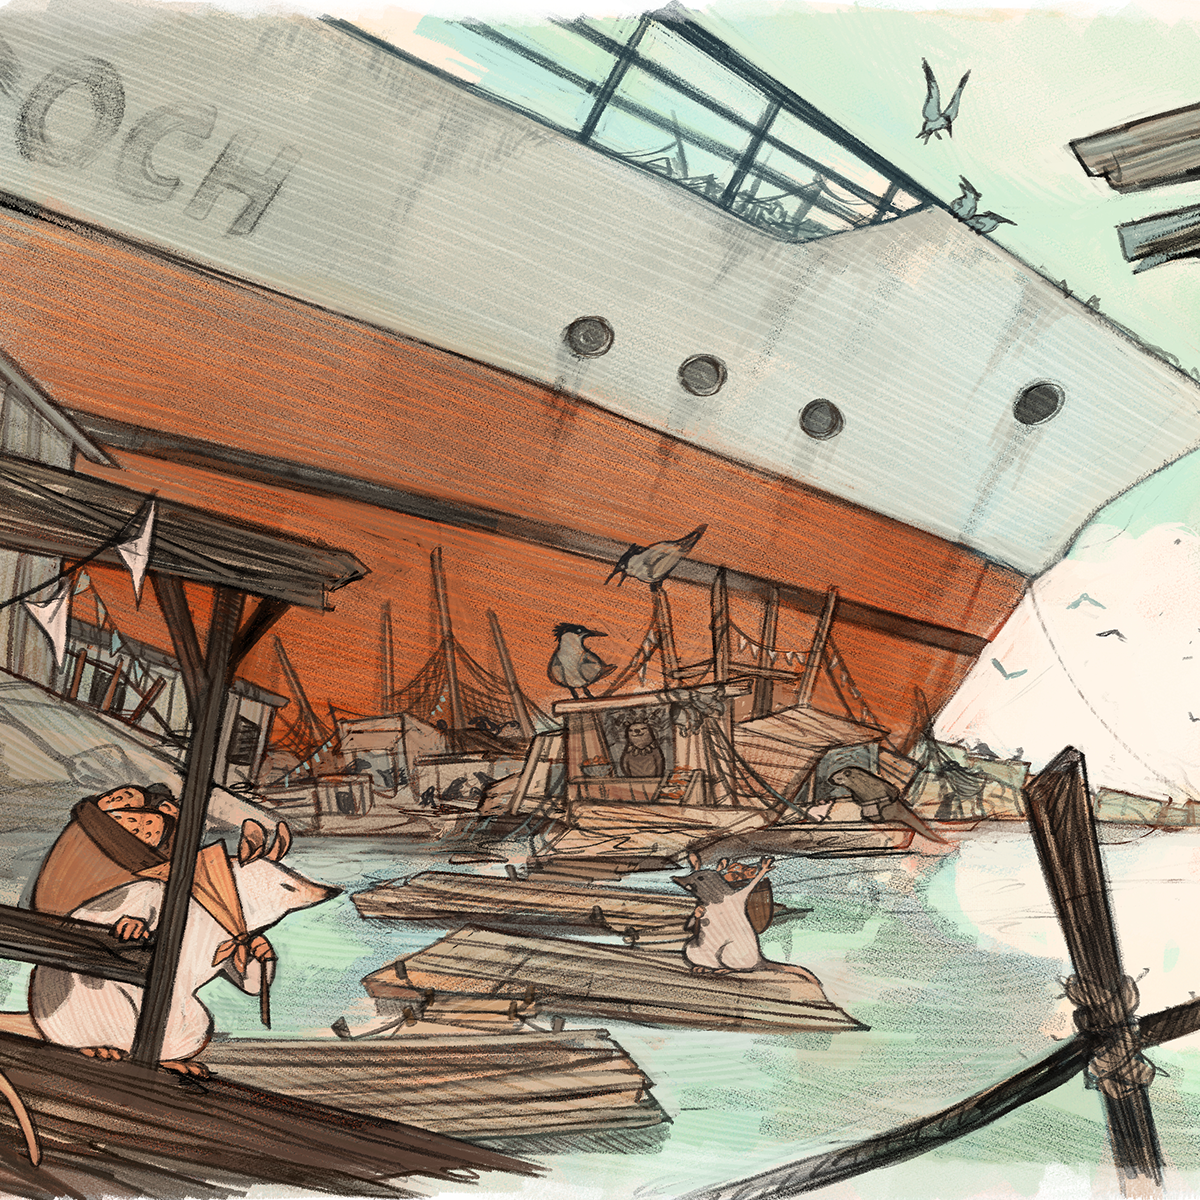 Image. A city of wooden pontoons is built around the wreck of a massive human ship. Small animals go about their days atop, inside and around the ship.